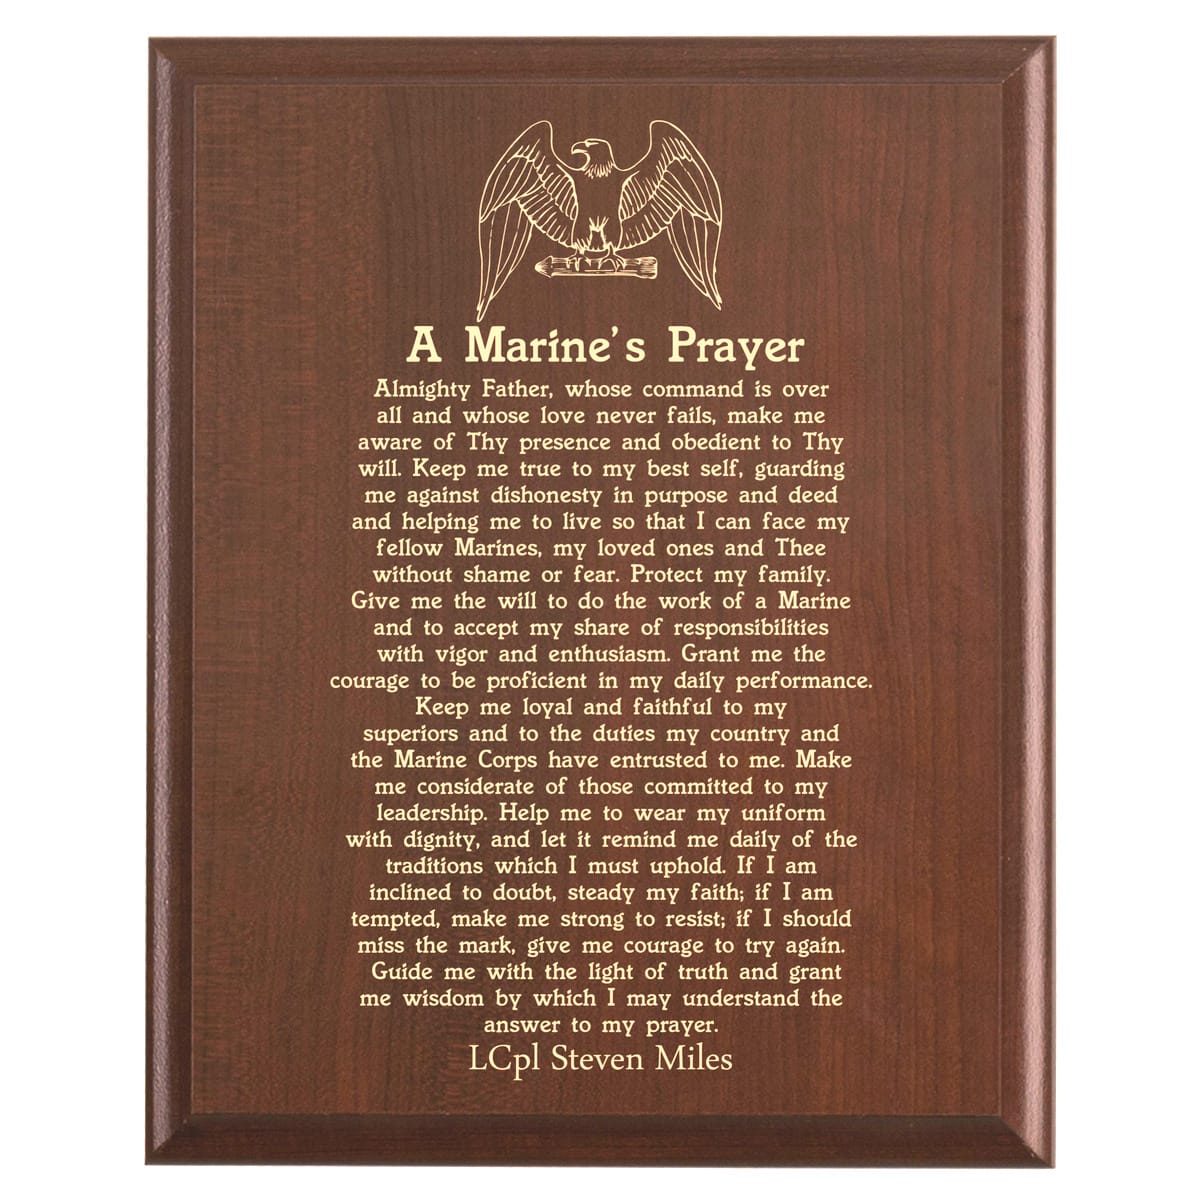 Plaque photo: Marine Corps Prayer Plaque design with free personalization. Wood style finish with customized text.